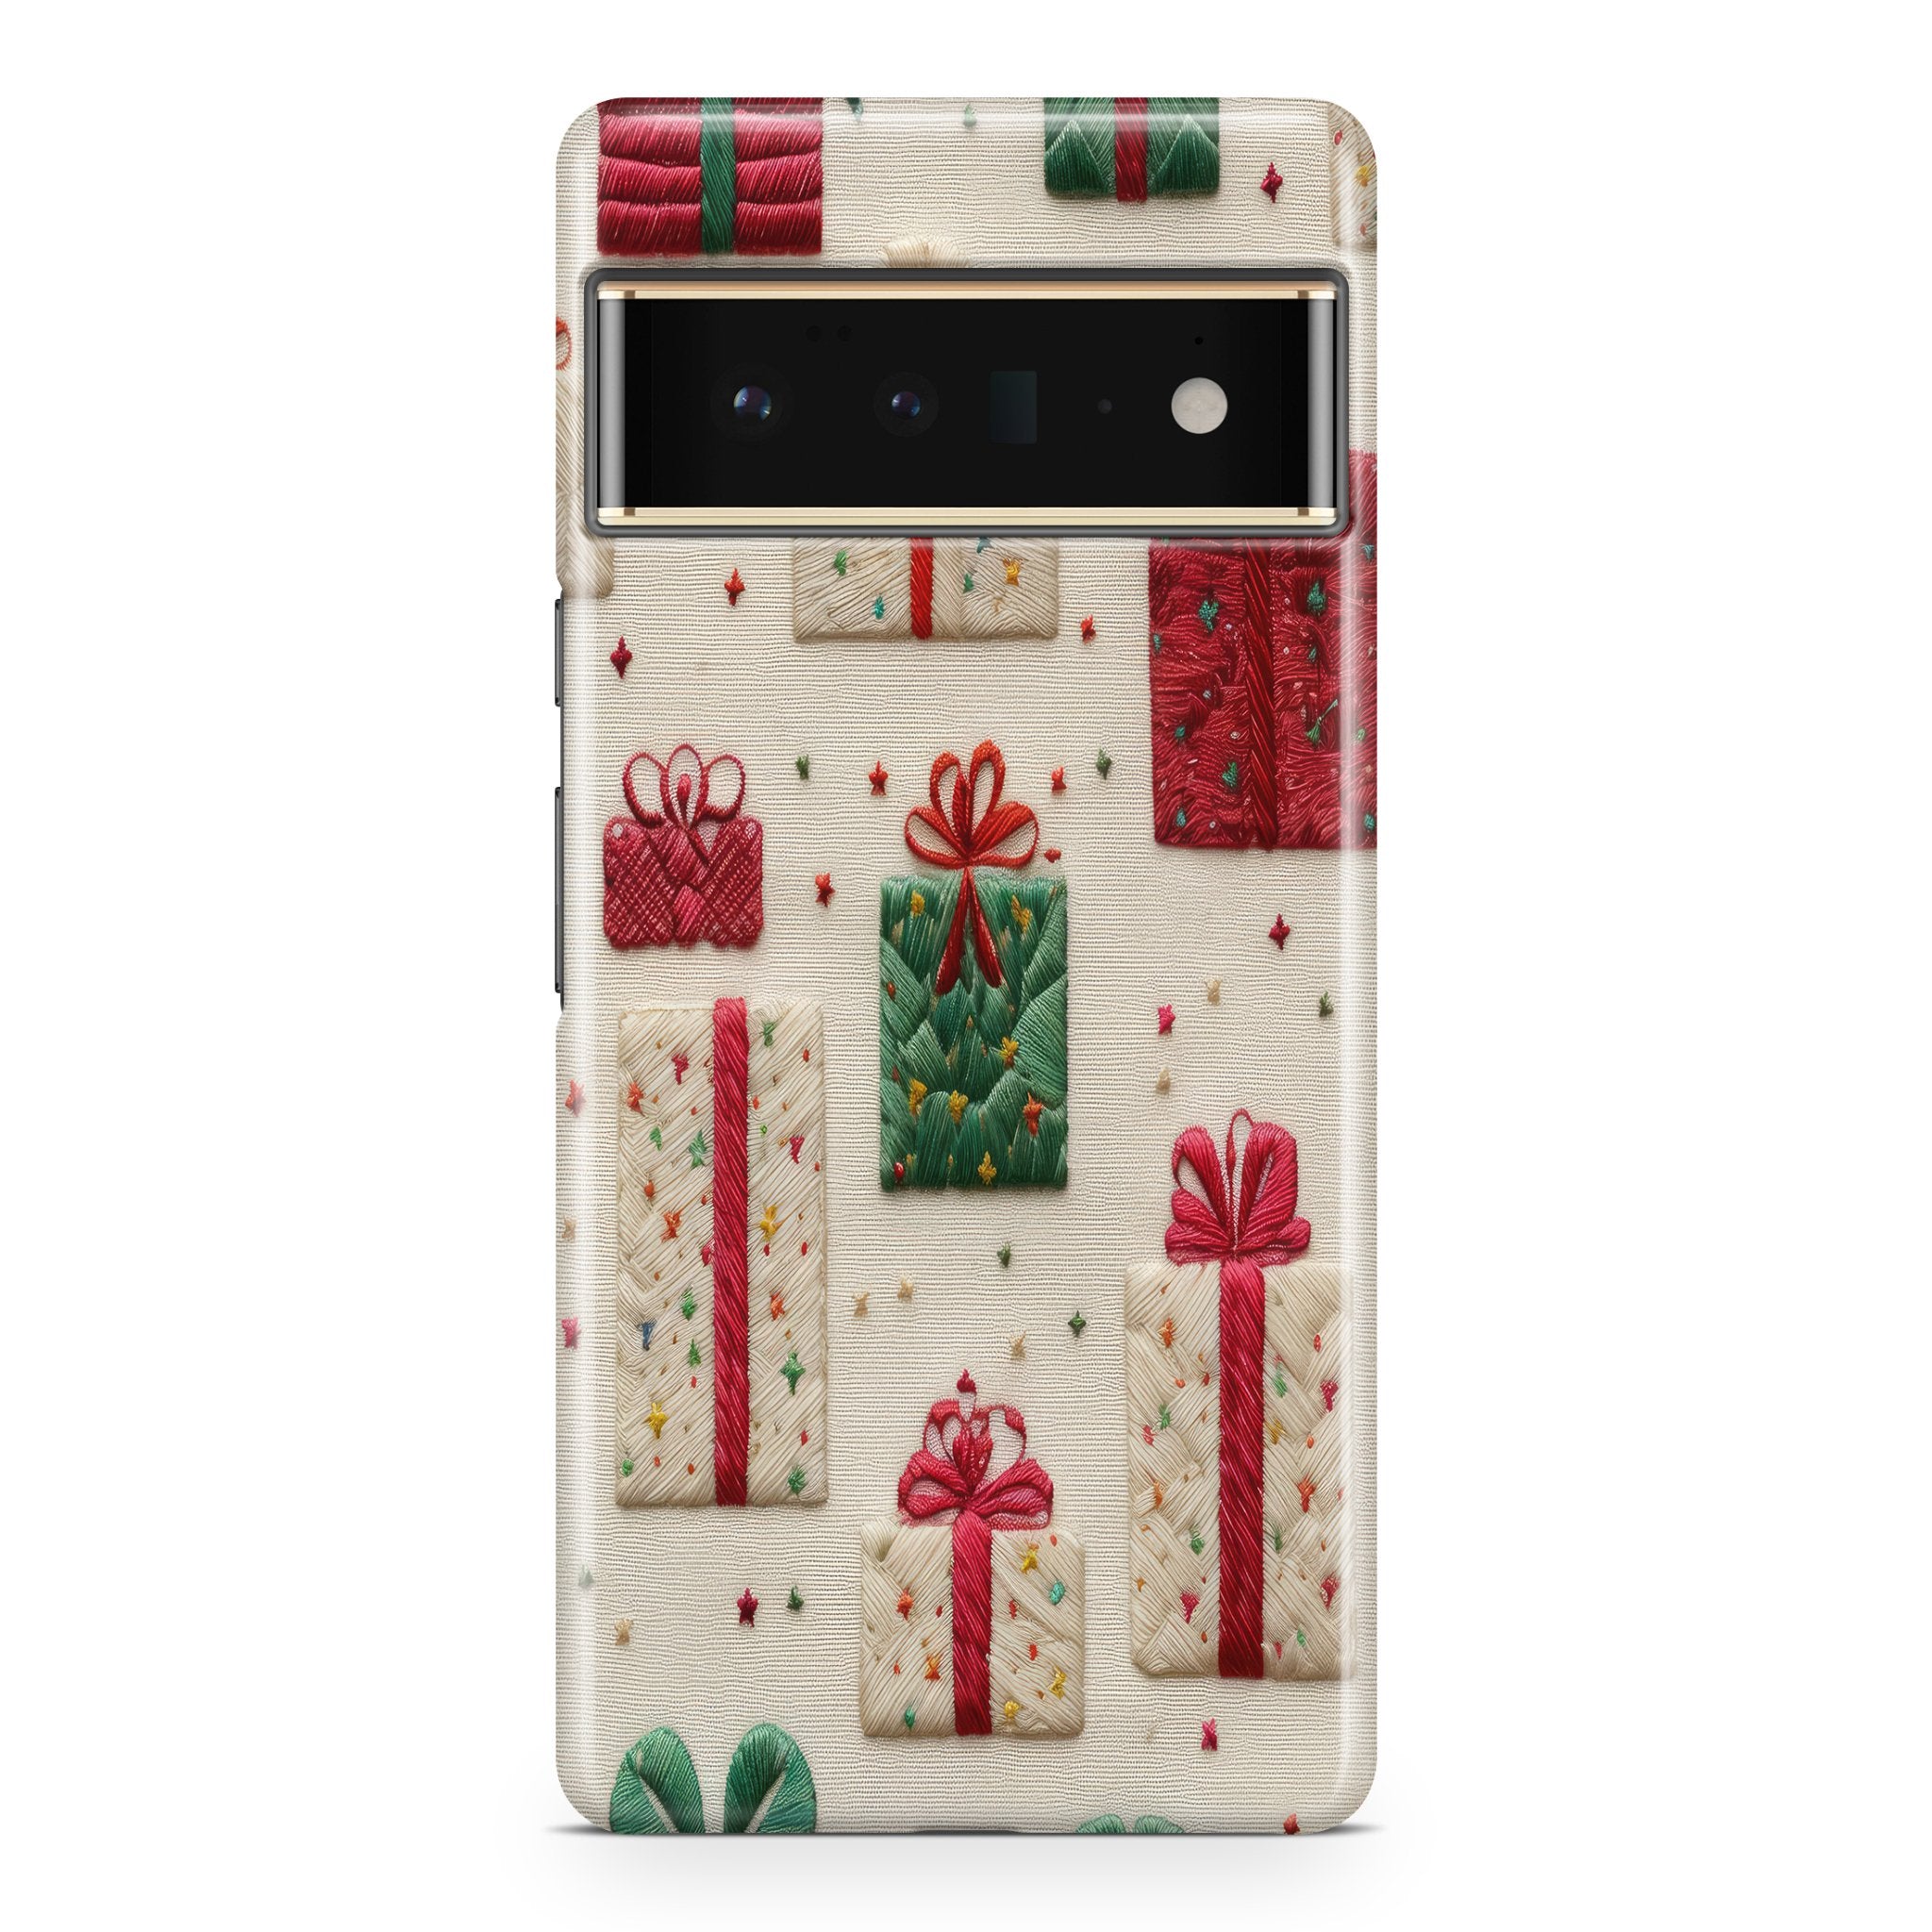 Christmas Presents - Google phone case designs by CaseSwagger